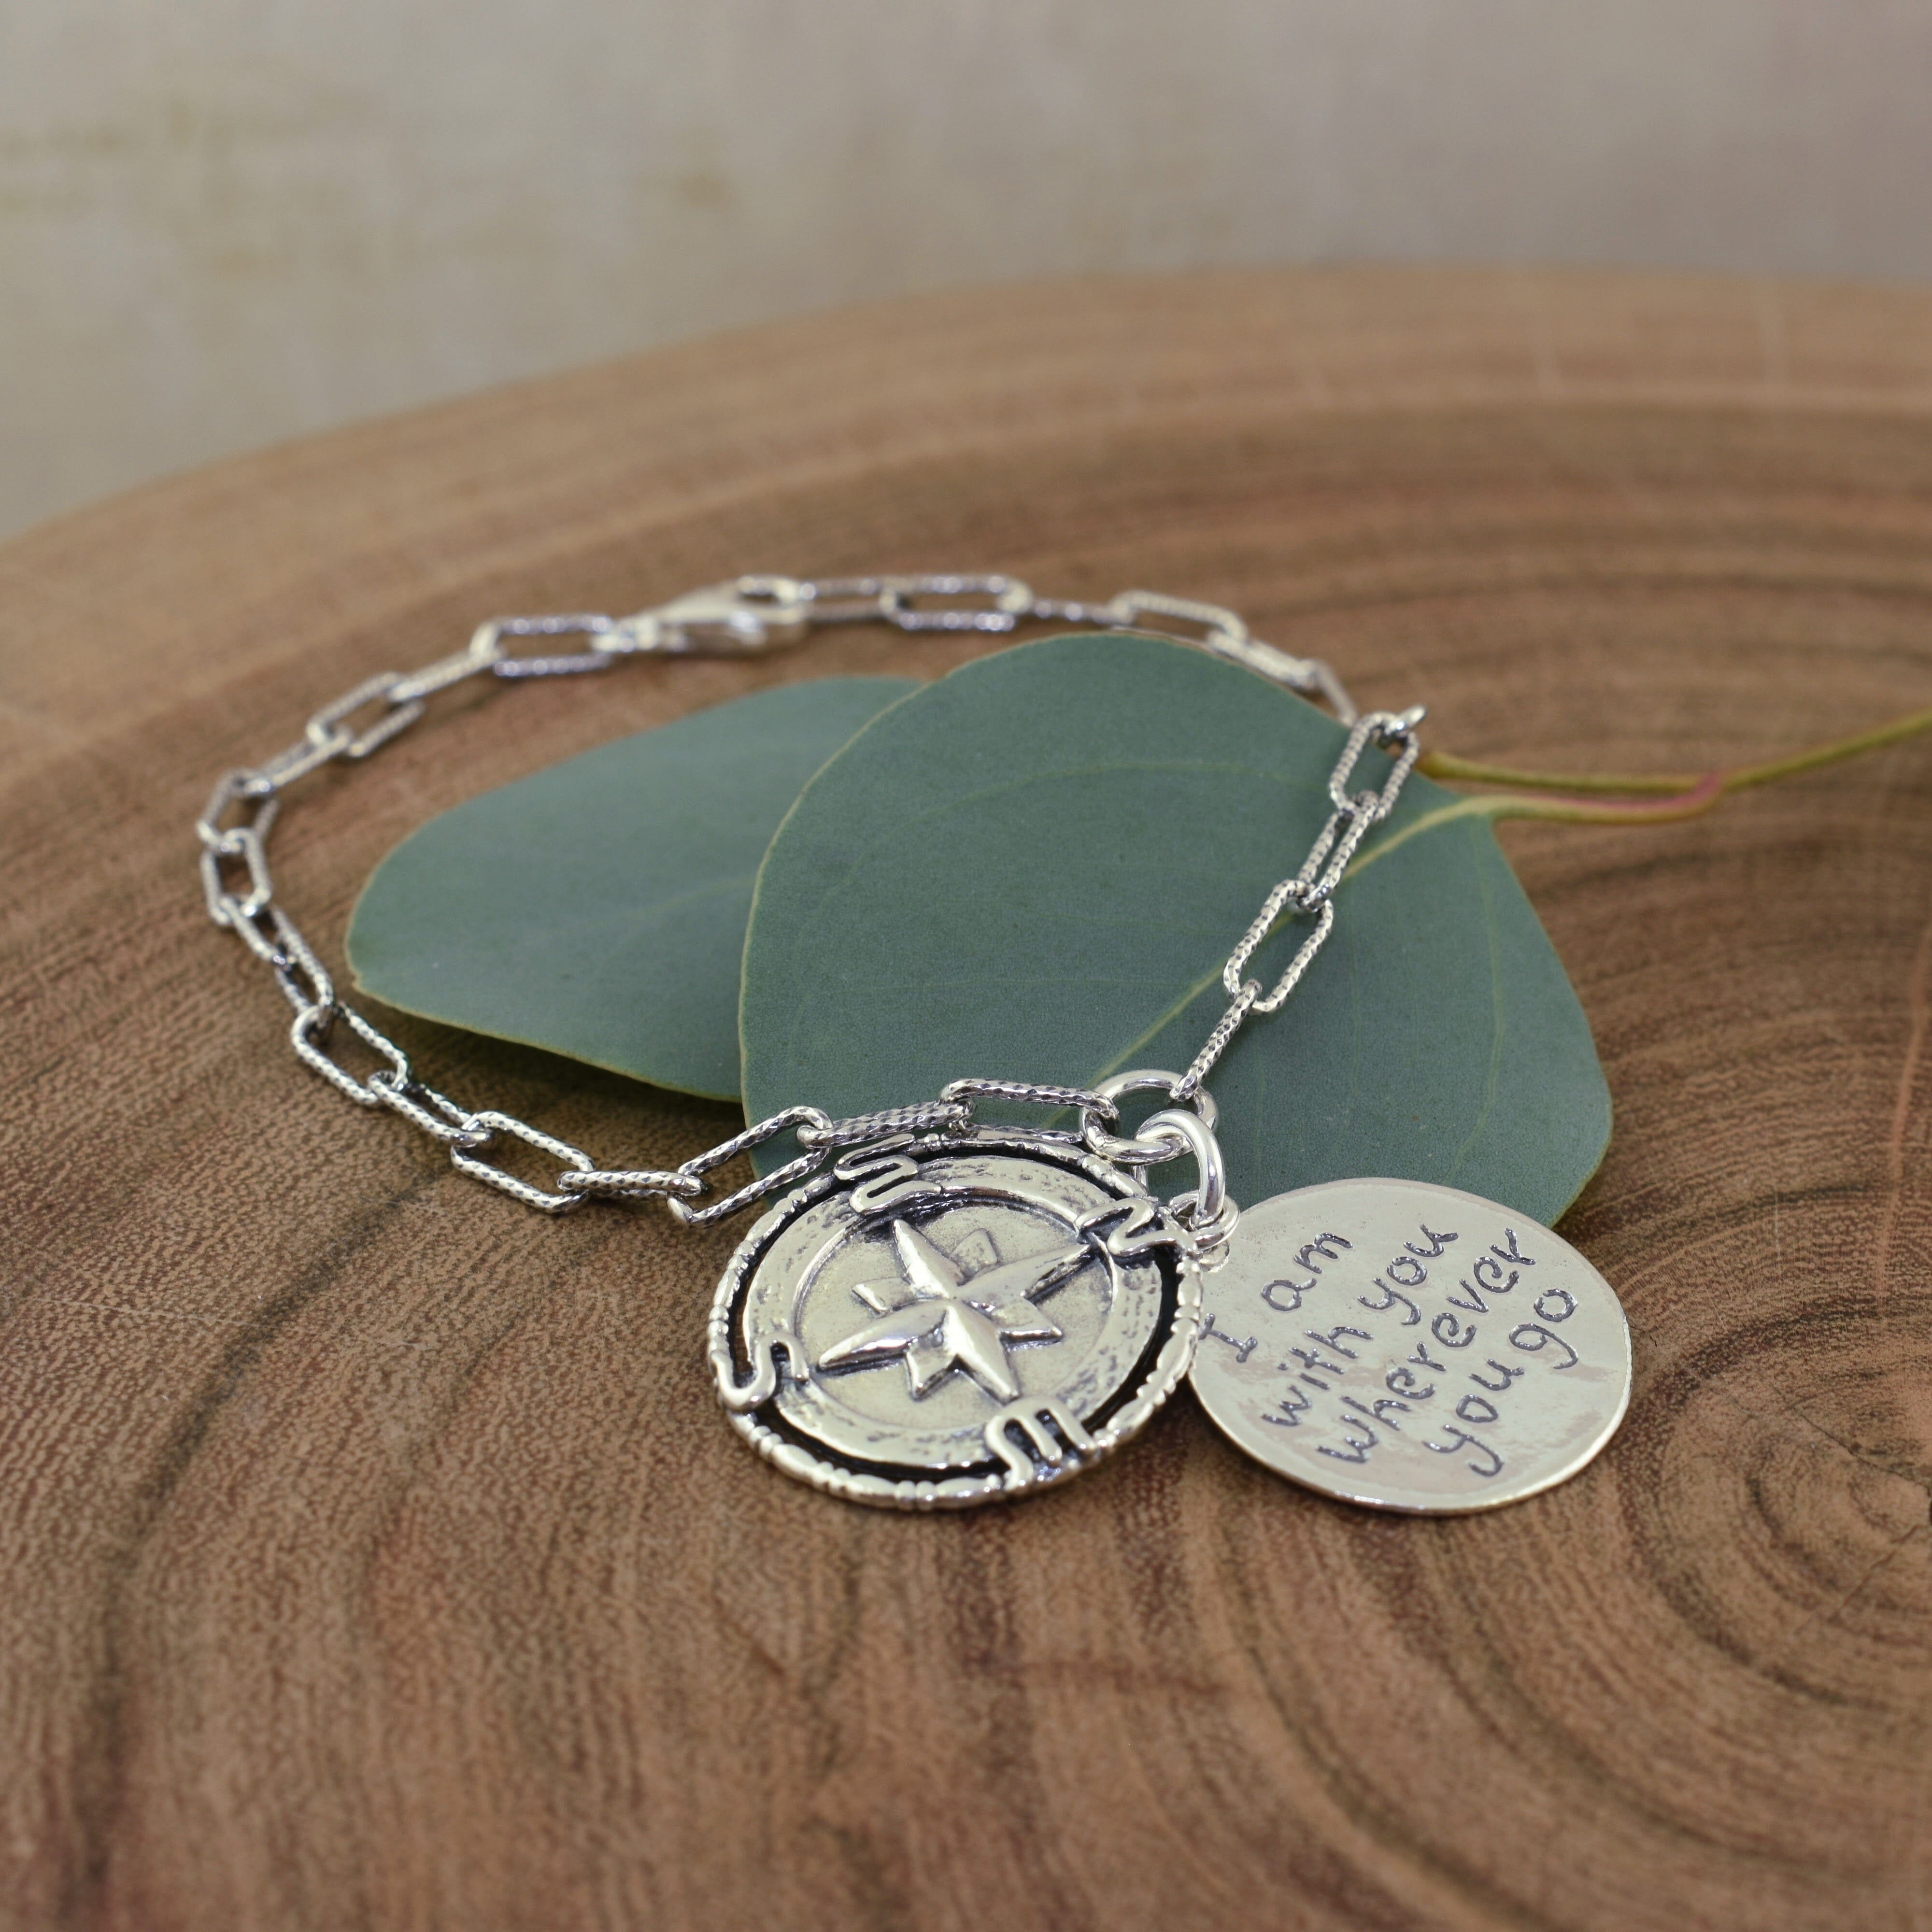 compass bracelet with the saying "I am with you wherever you go"